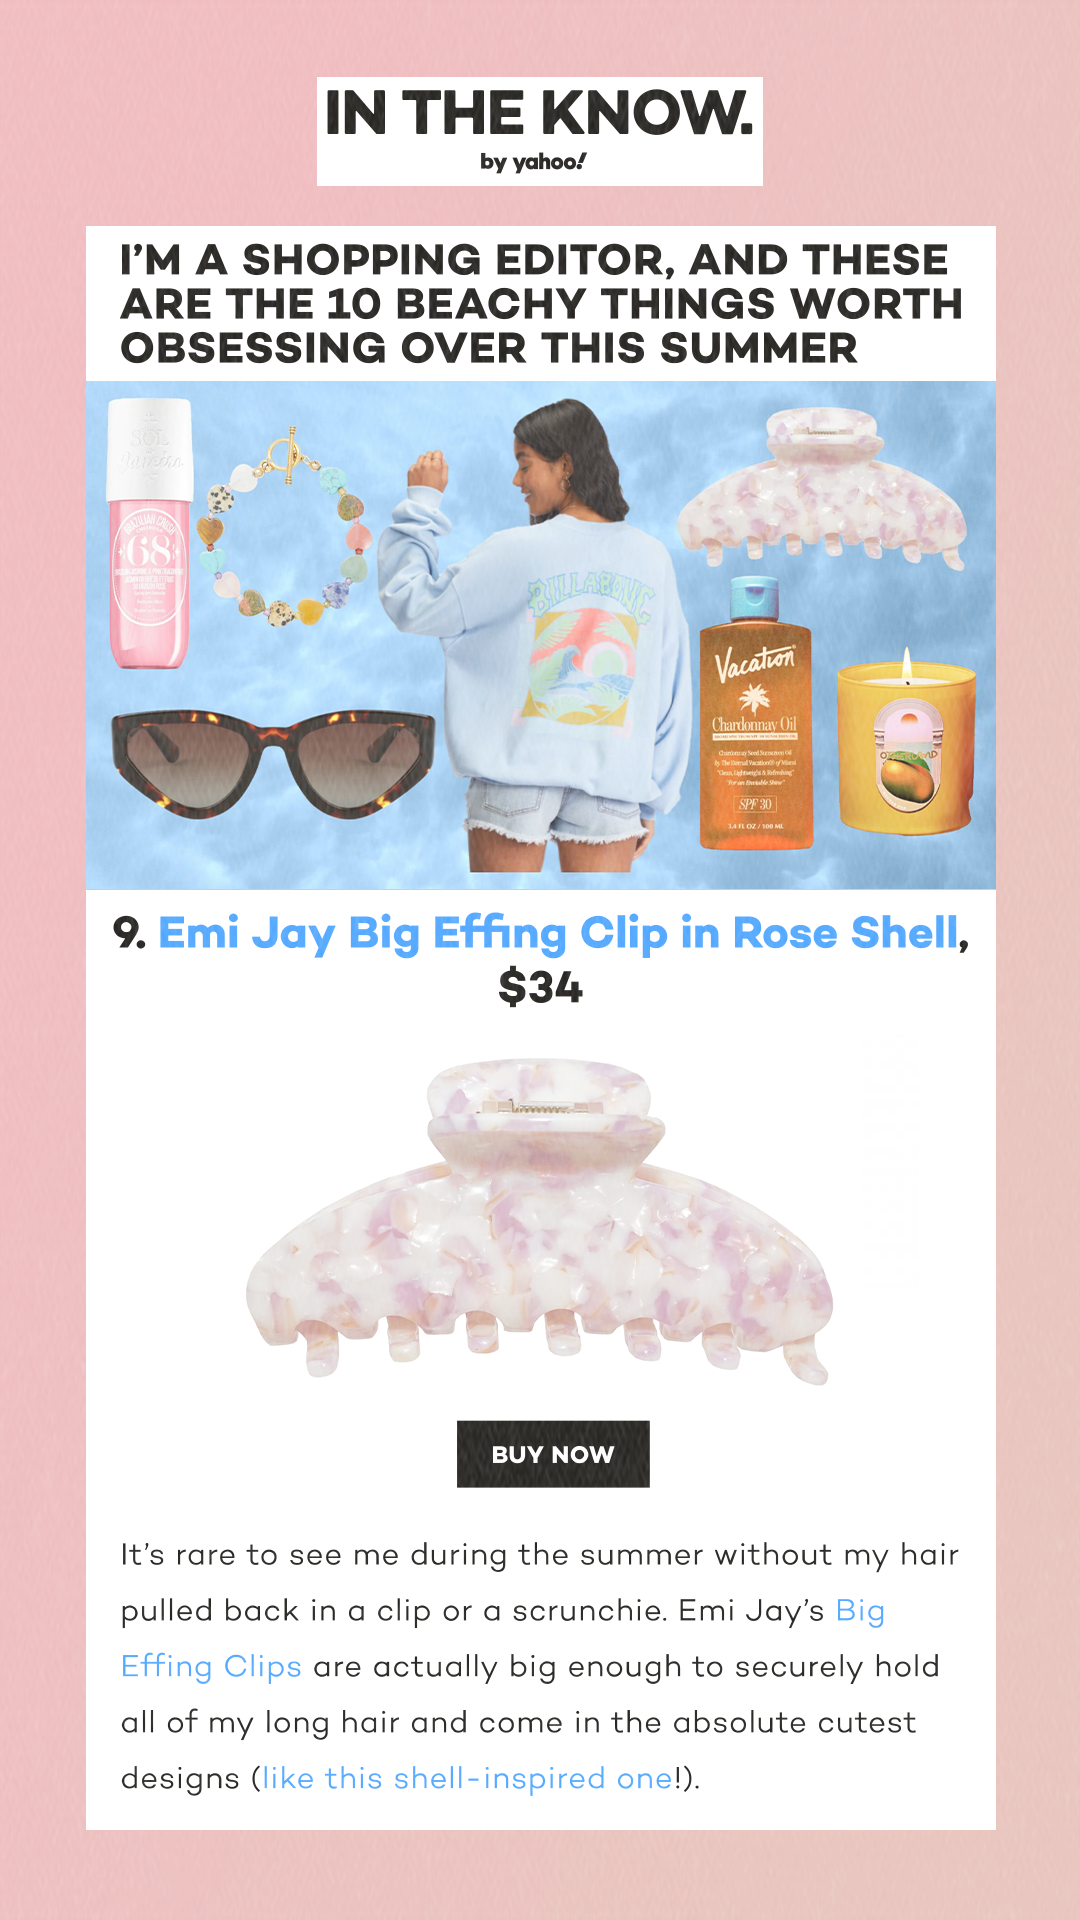 I’m a shopping editor, and these are the 10 beachy things worth obsessing over this summer 9. Emi Jay Big Effing Clip in Rose Shell, $34 Credit: Emi Jay Buy Now It’s rare to see me during the summer without my hair pulled back in a clip or a scrunchie. Emi Jay’s Big Effing Clips are actually big enough to securely hold all of my long hair and come in the absolute cutest designs (like this shell-inspired one!).